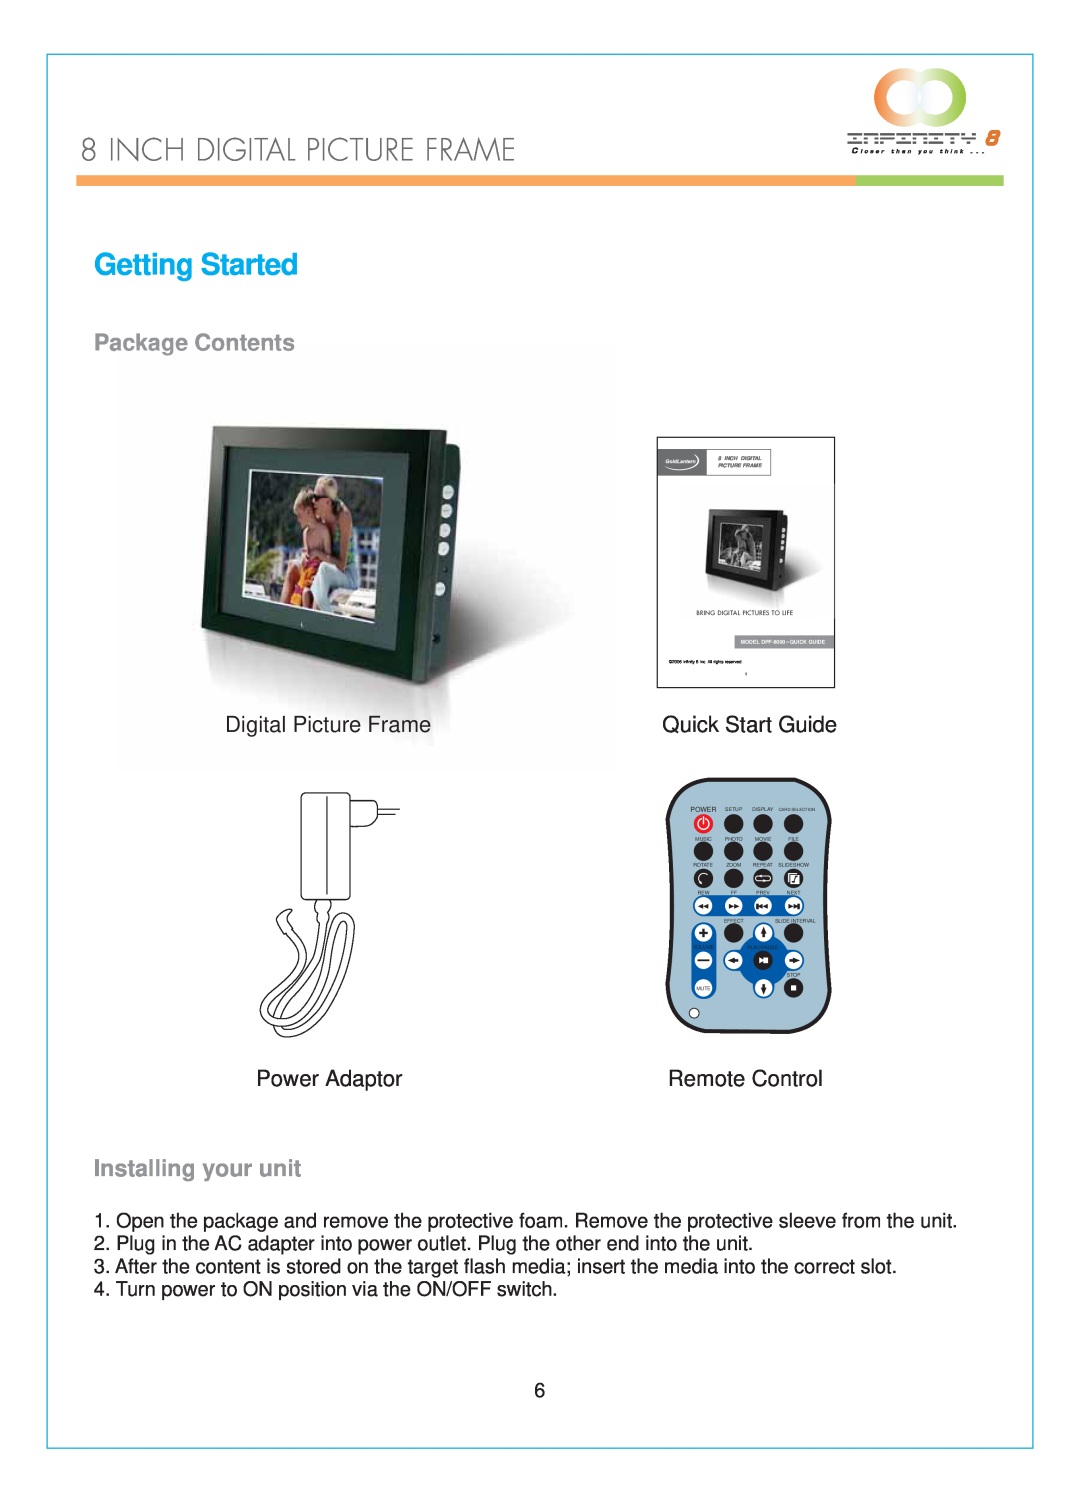 Infinity DPF-8000 Getting Started, Package Contents, Installing your unit, Quick Start Guide, Inch Digital Picture Frame 